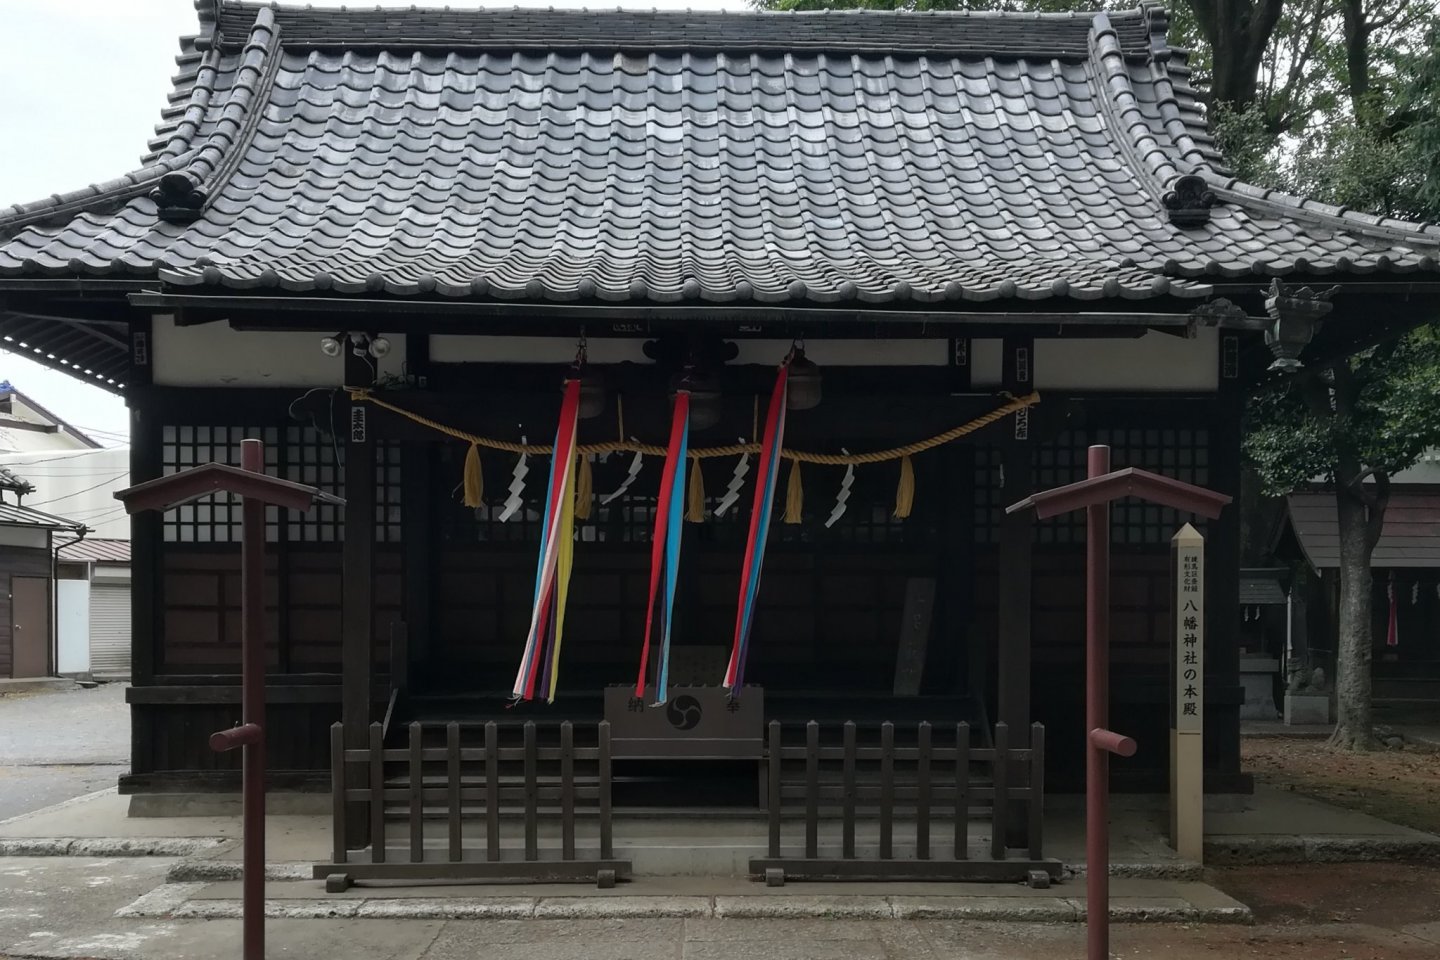 The main building of the shrine